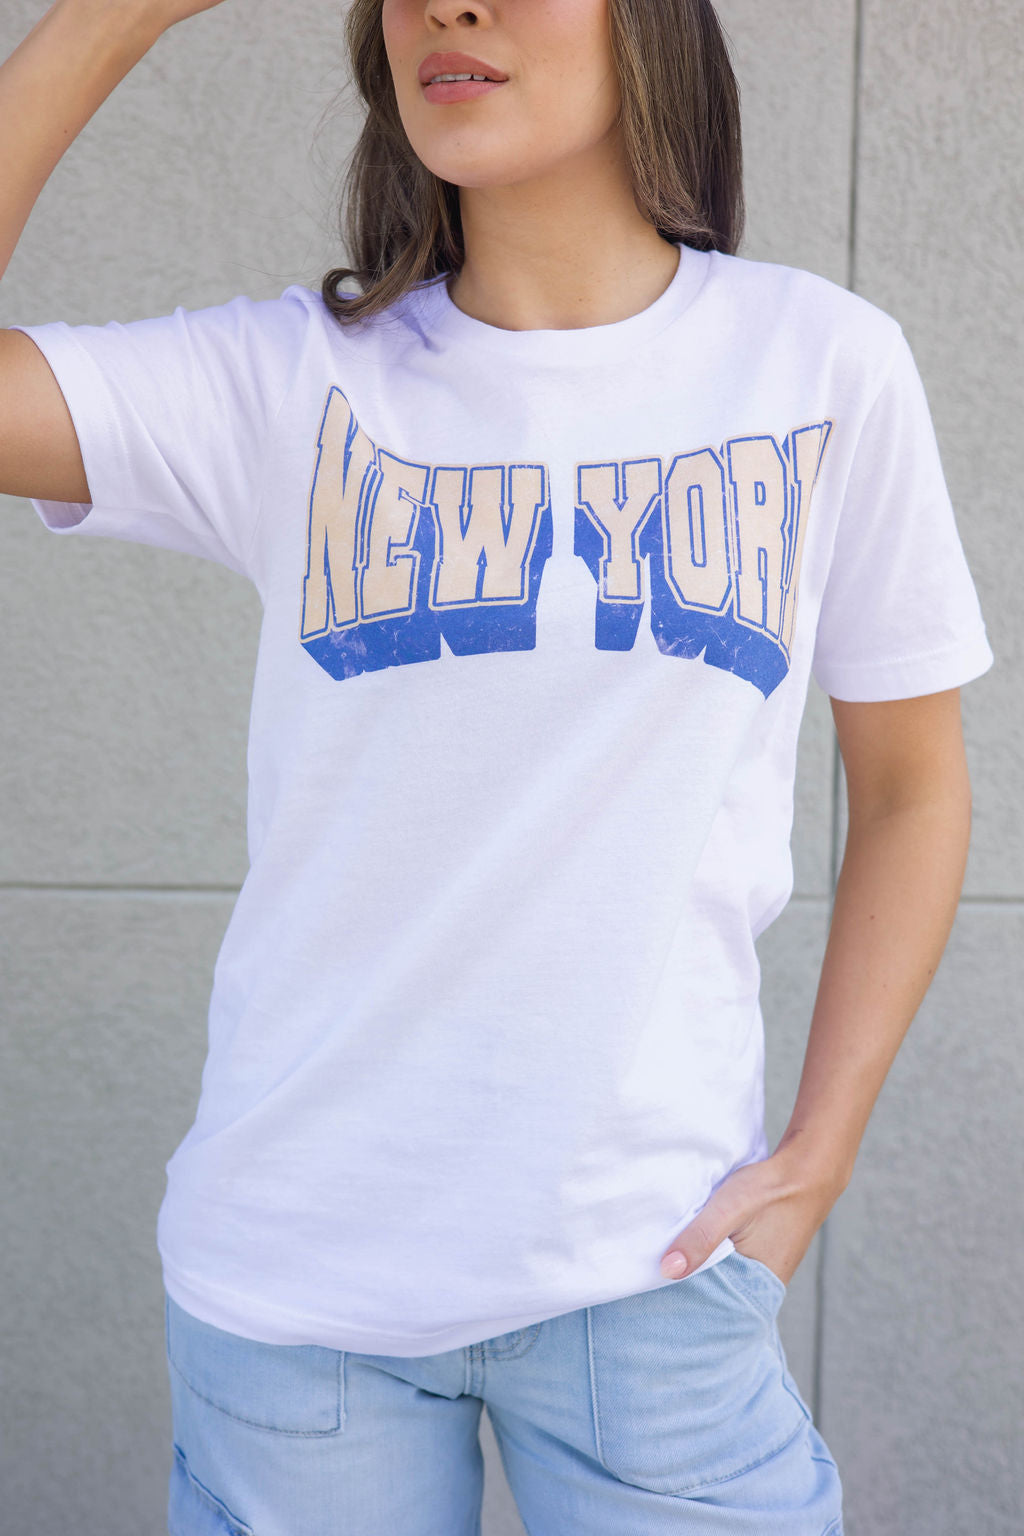 THE NEW YORK TEE IN WHITE